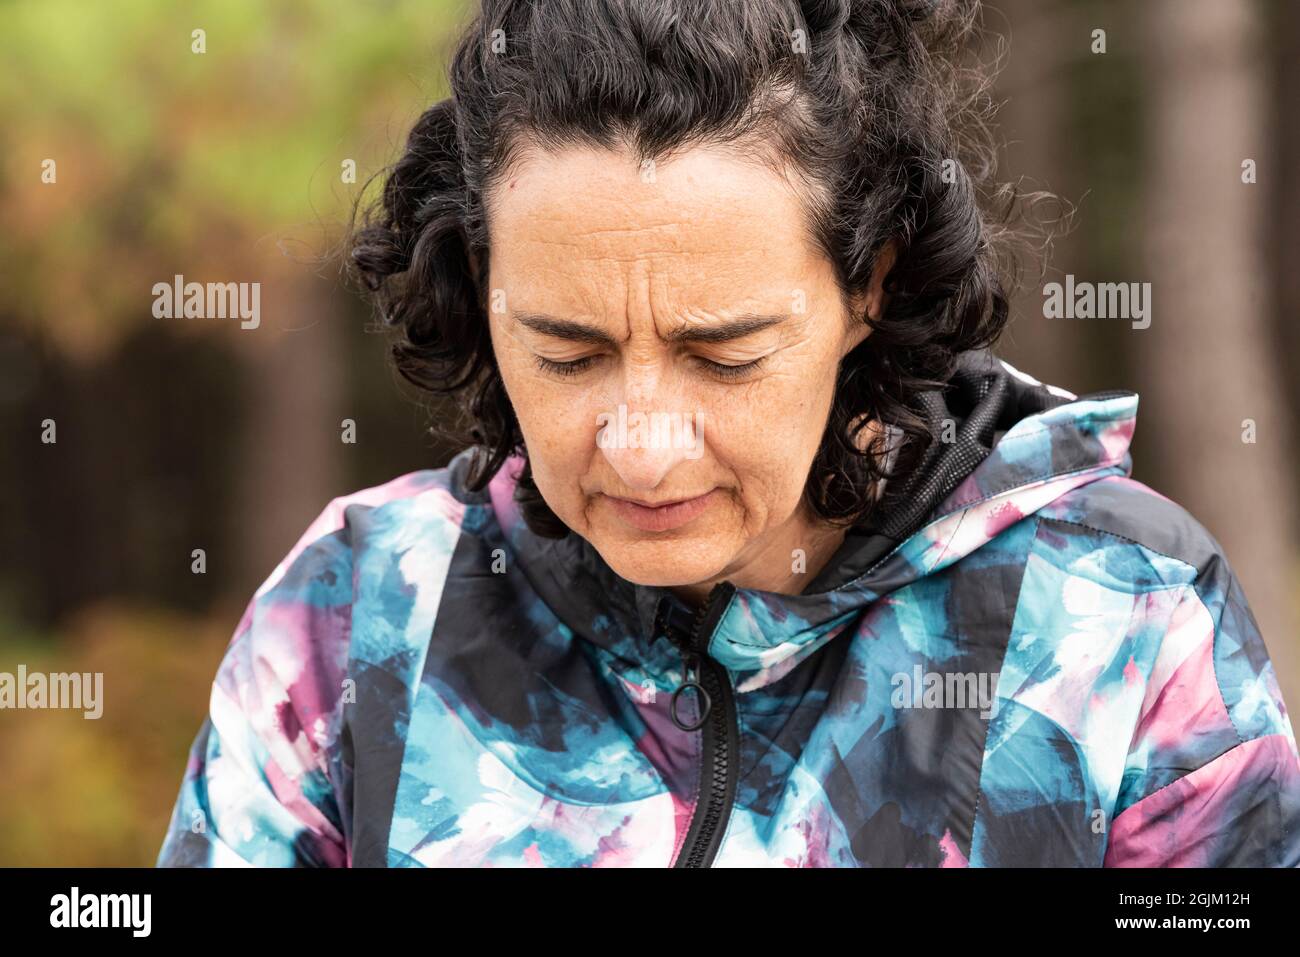 half-length portrait of a middle-aged white Caucasian woman with brown hair, dressed in rain gear. Stock Photo